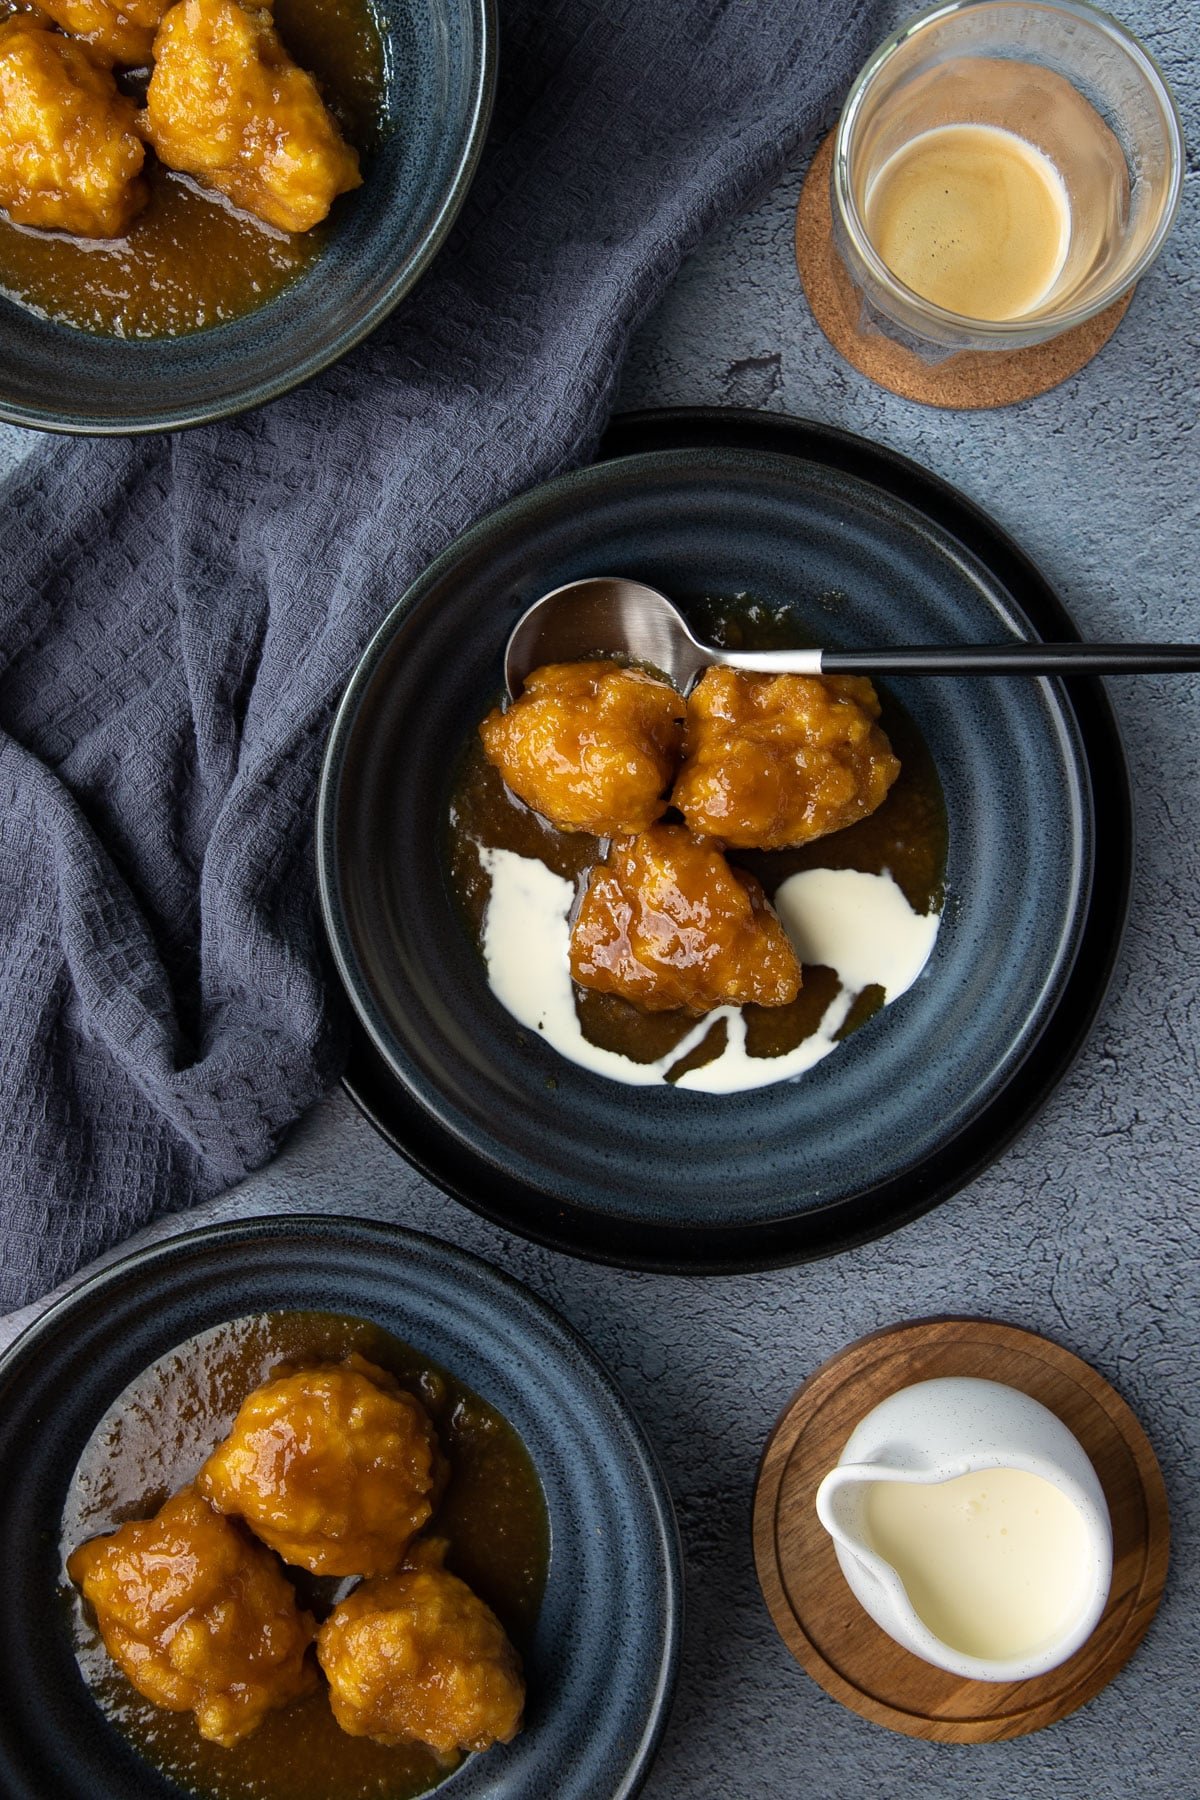 golden syrup dumplings in bowls on a table with cream and coffee.